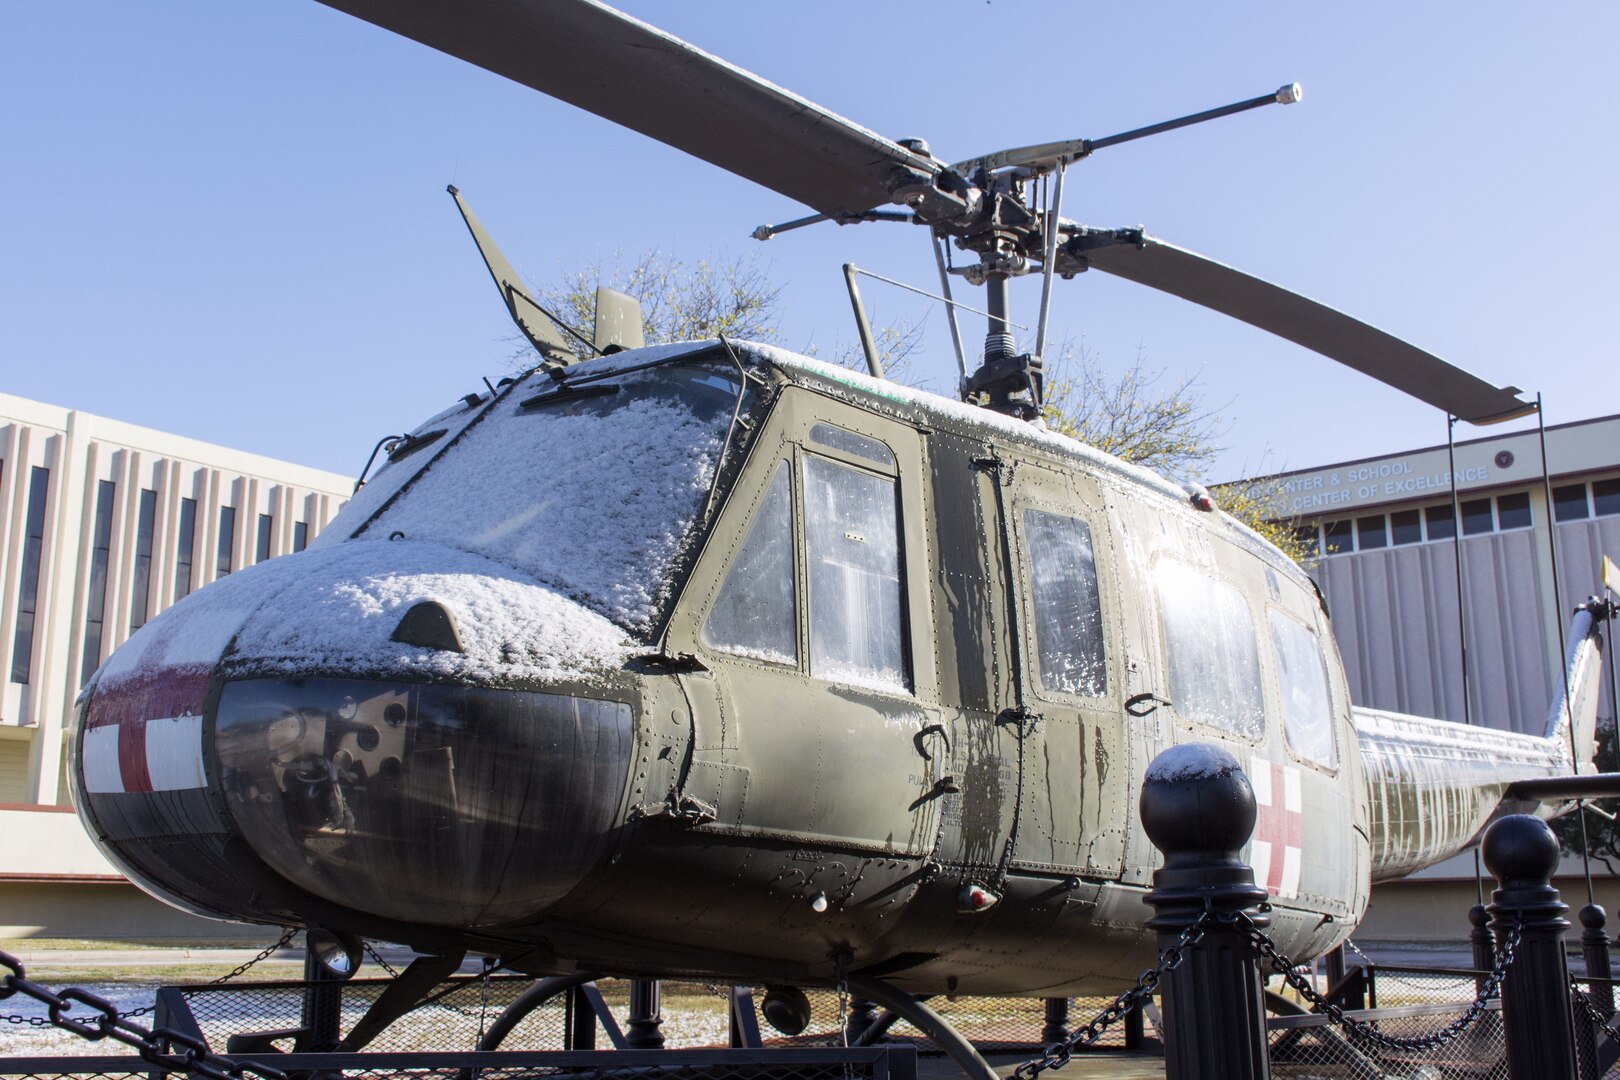 The UH-1 helicopter on display at the U.S. Army Medical Department Center and School partially covered in snow. Thursday's event was the earliest seasonal snowfall on record for San Antonio.